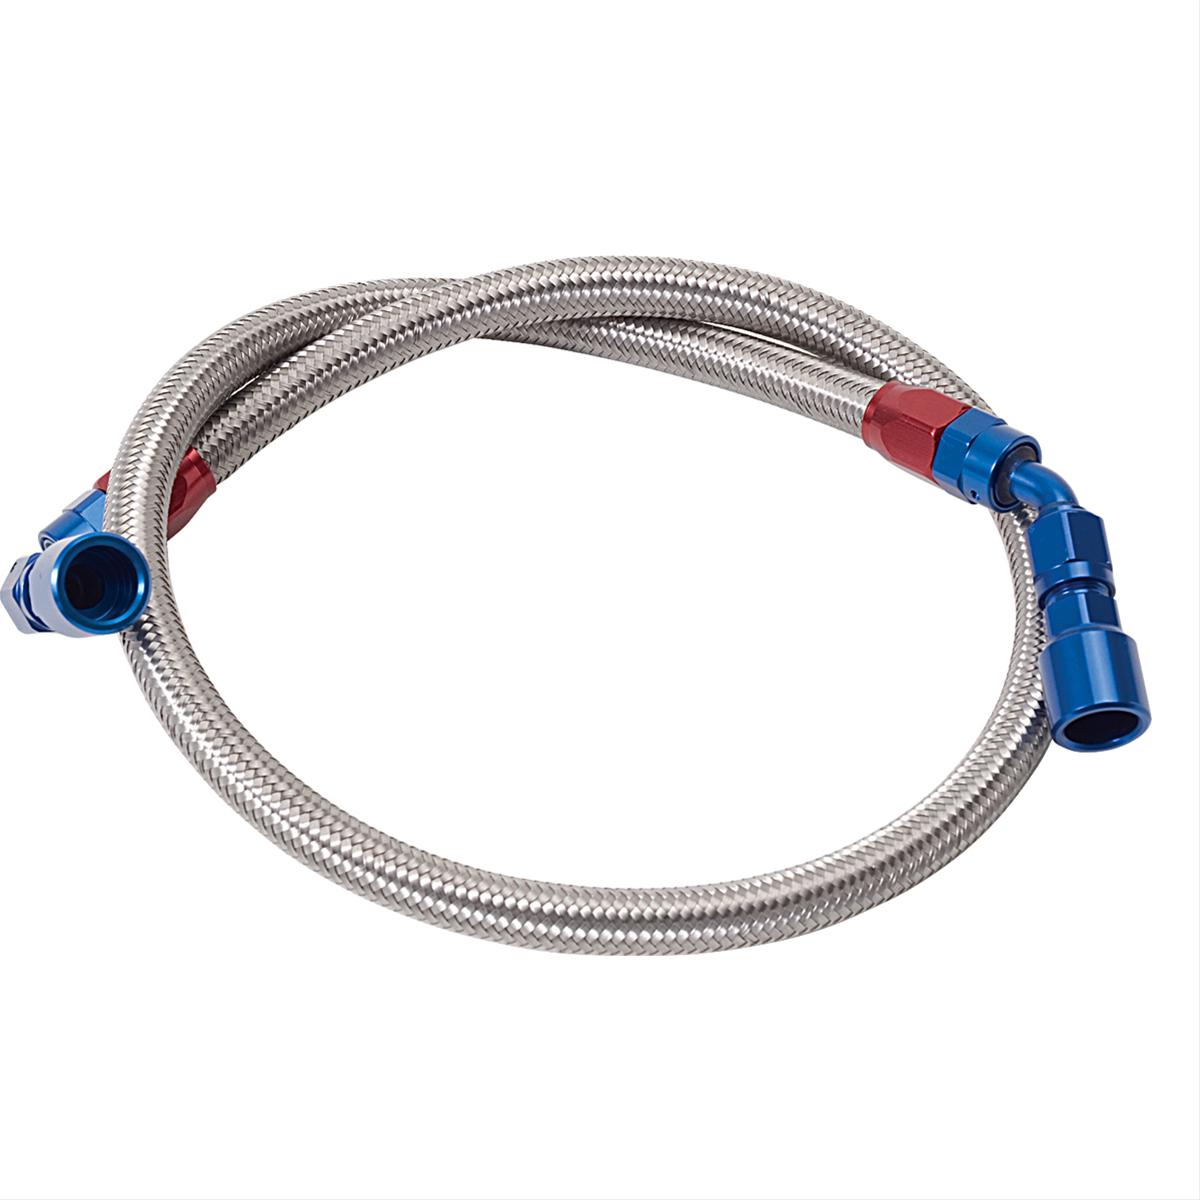 Russell Performance 651110 Russell Stainless Steel Braided Fuel Hose Kits